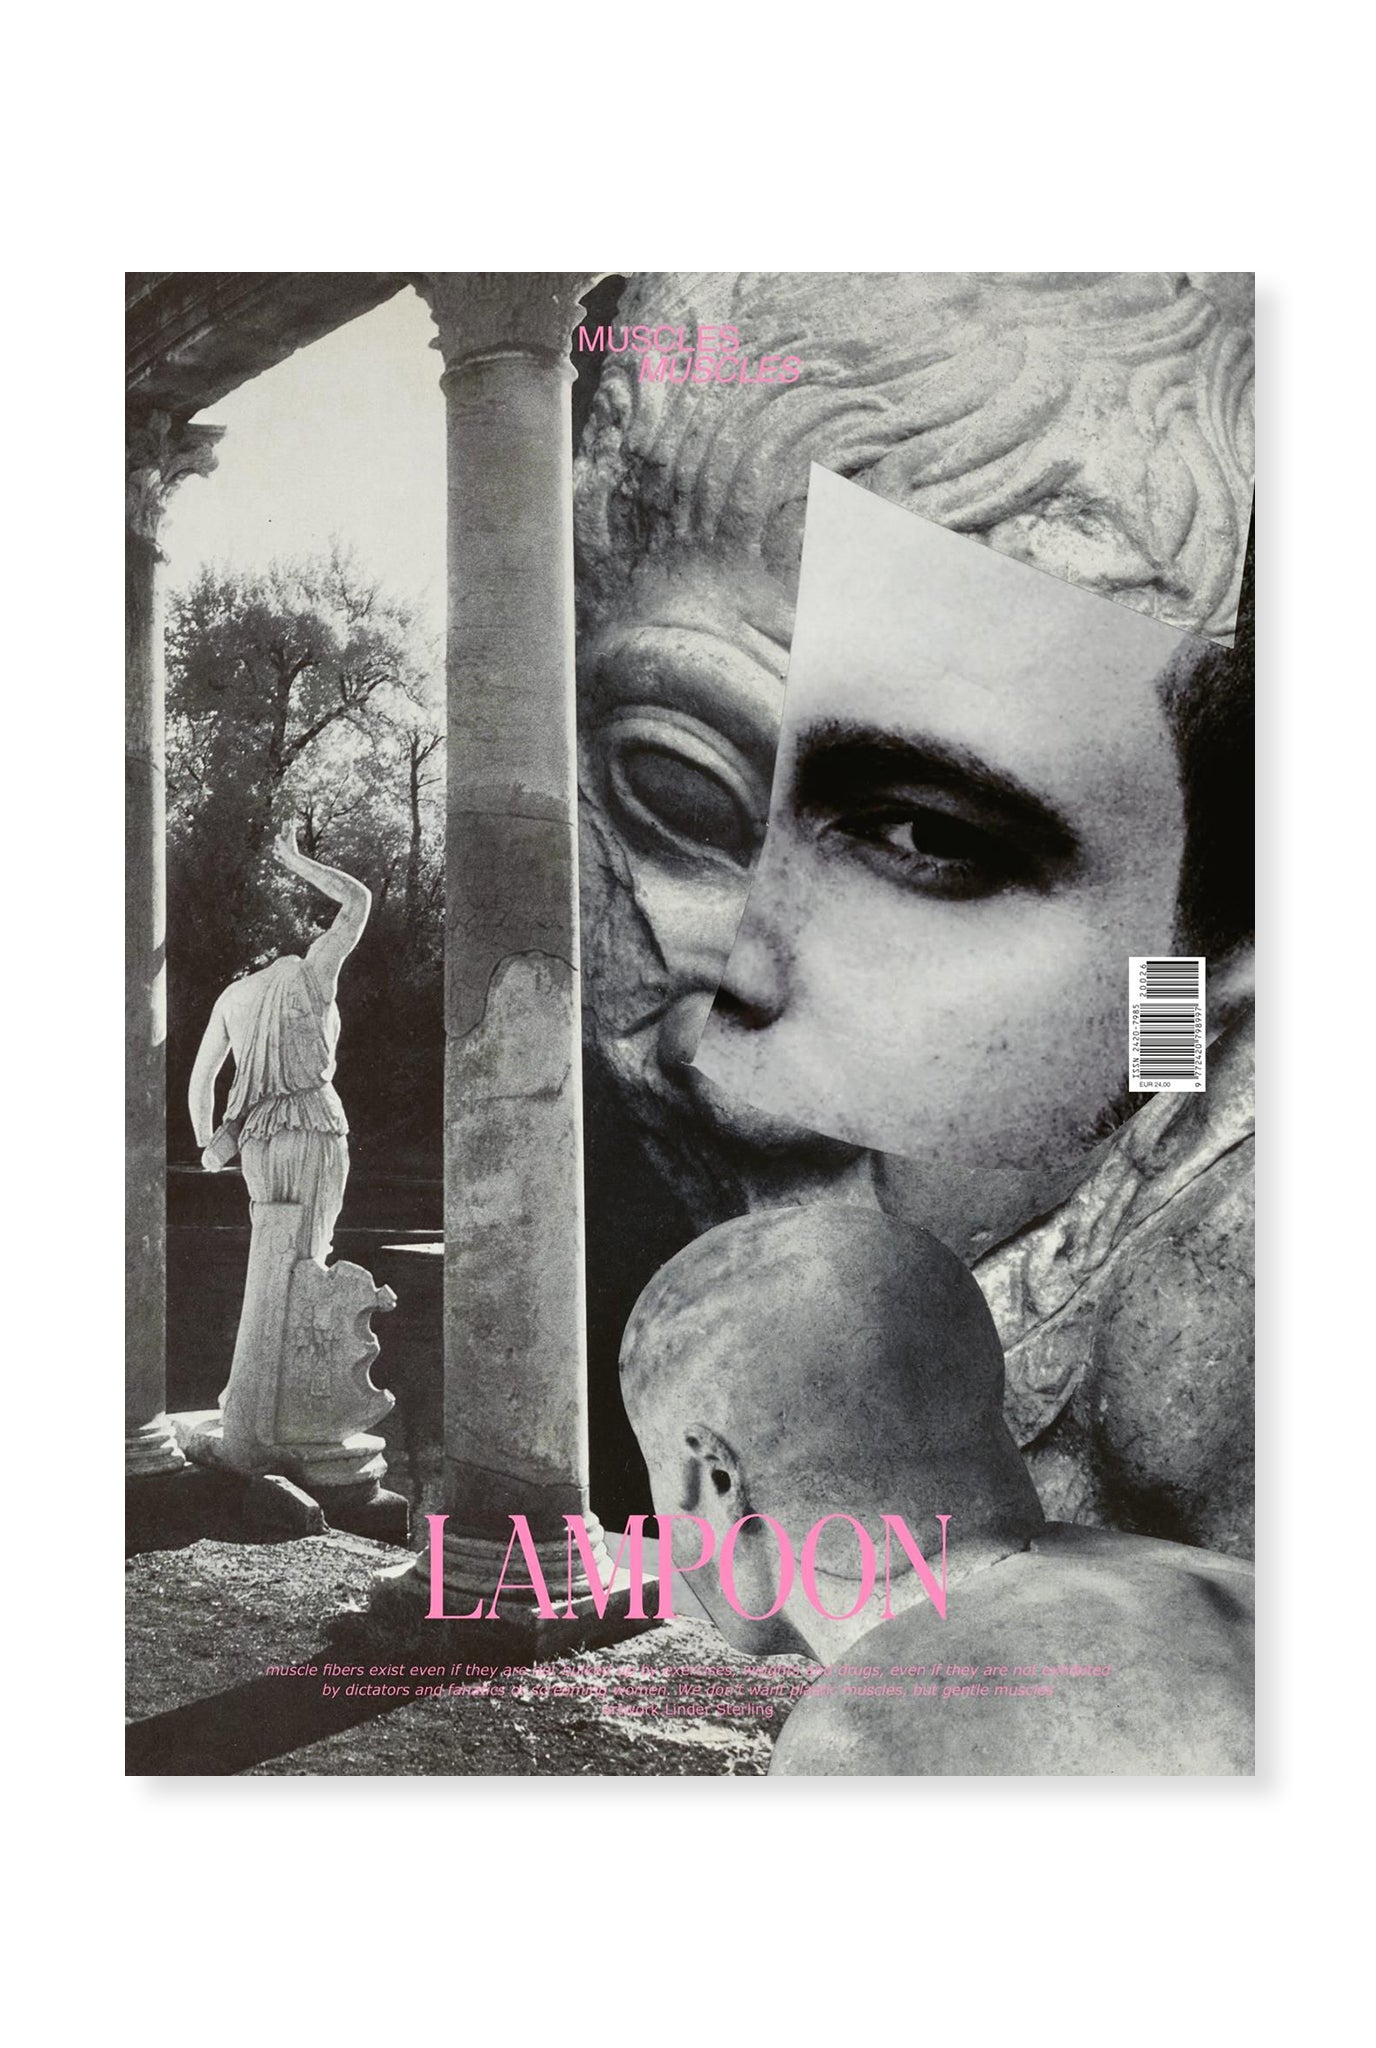 Lampoon, Issue 26